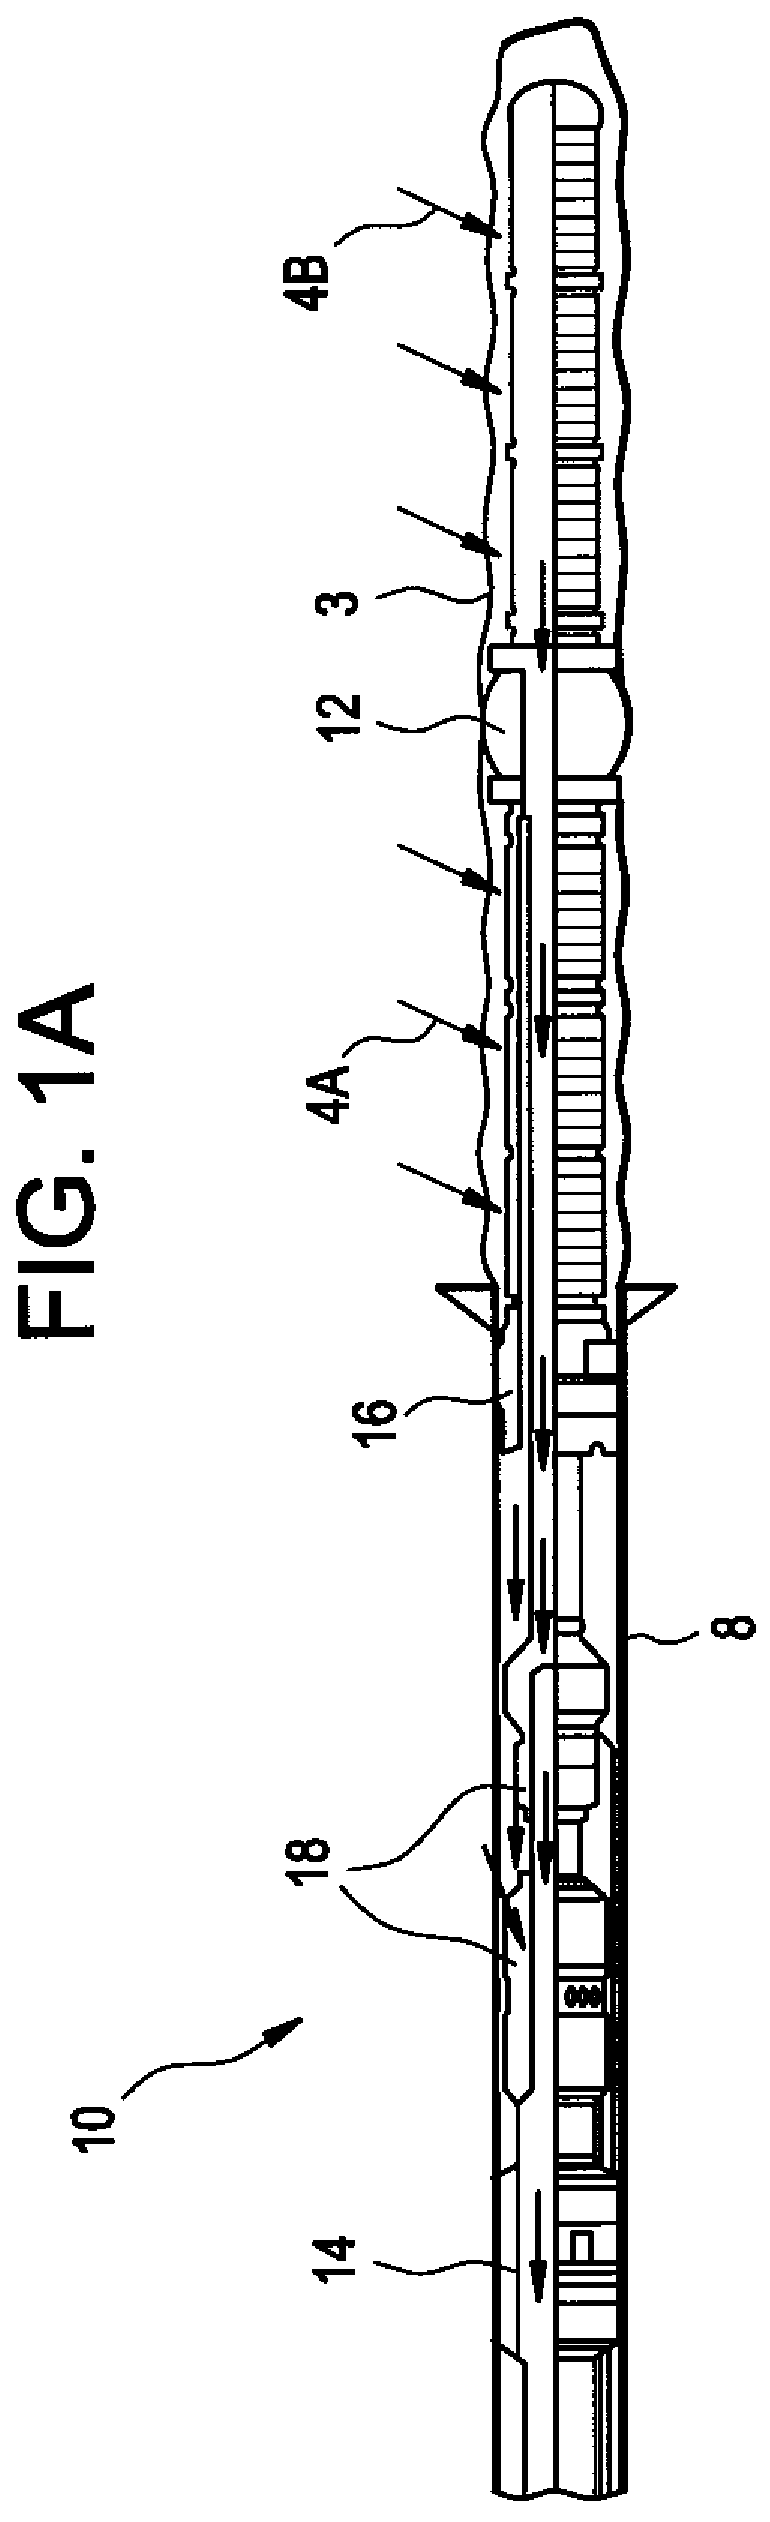 Oilfield apparatus comprising swellable elastomers having nanosensors therein and methods of using same in oilfield application